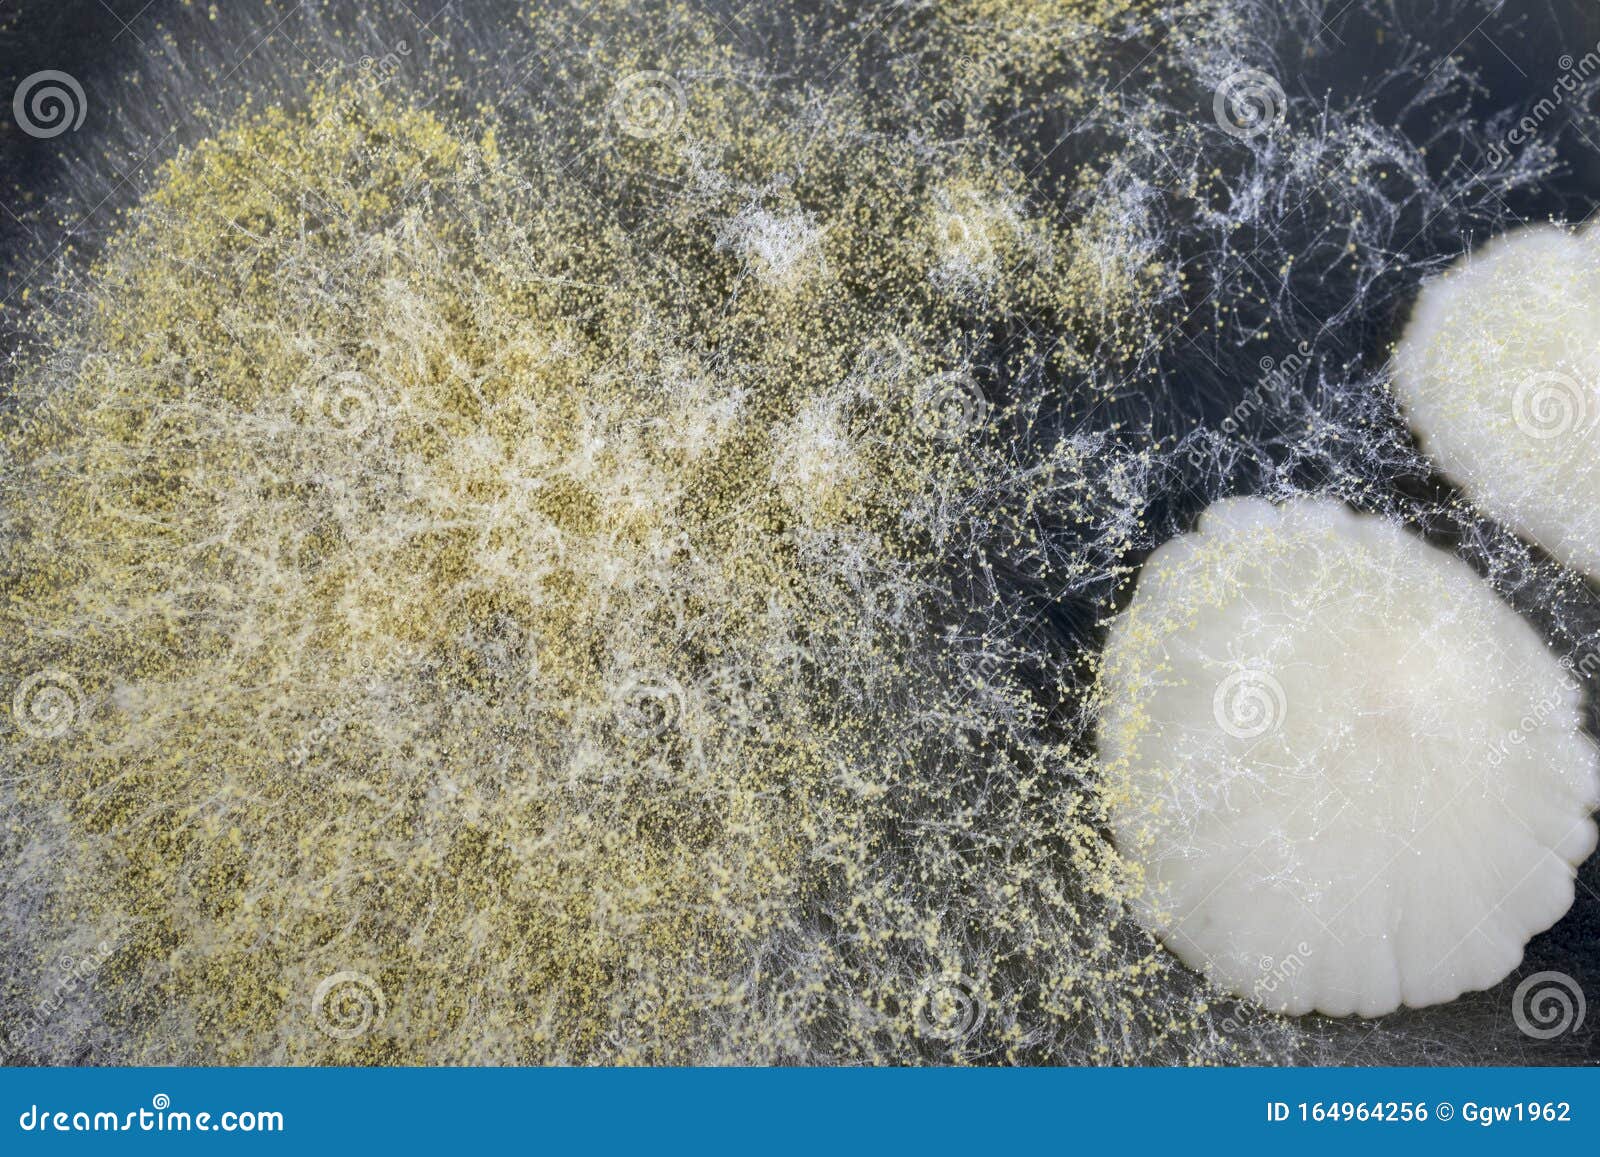 Yeast and mold stock photo. Image of morphology, inspection - 164964256